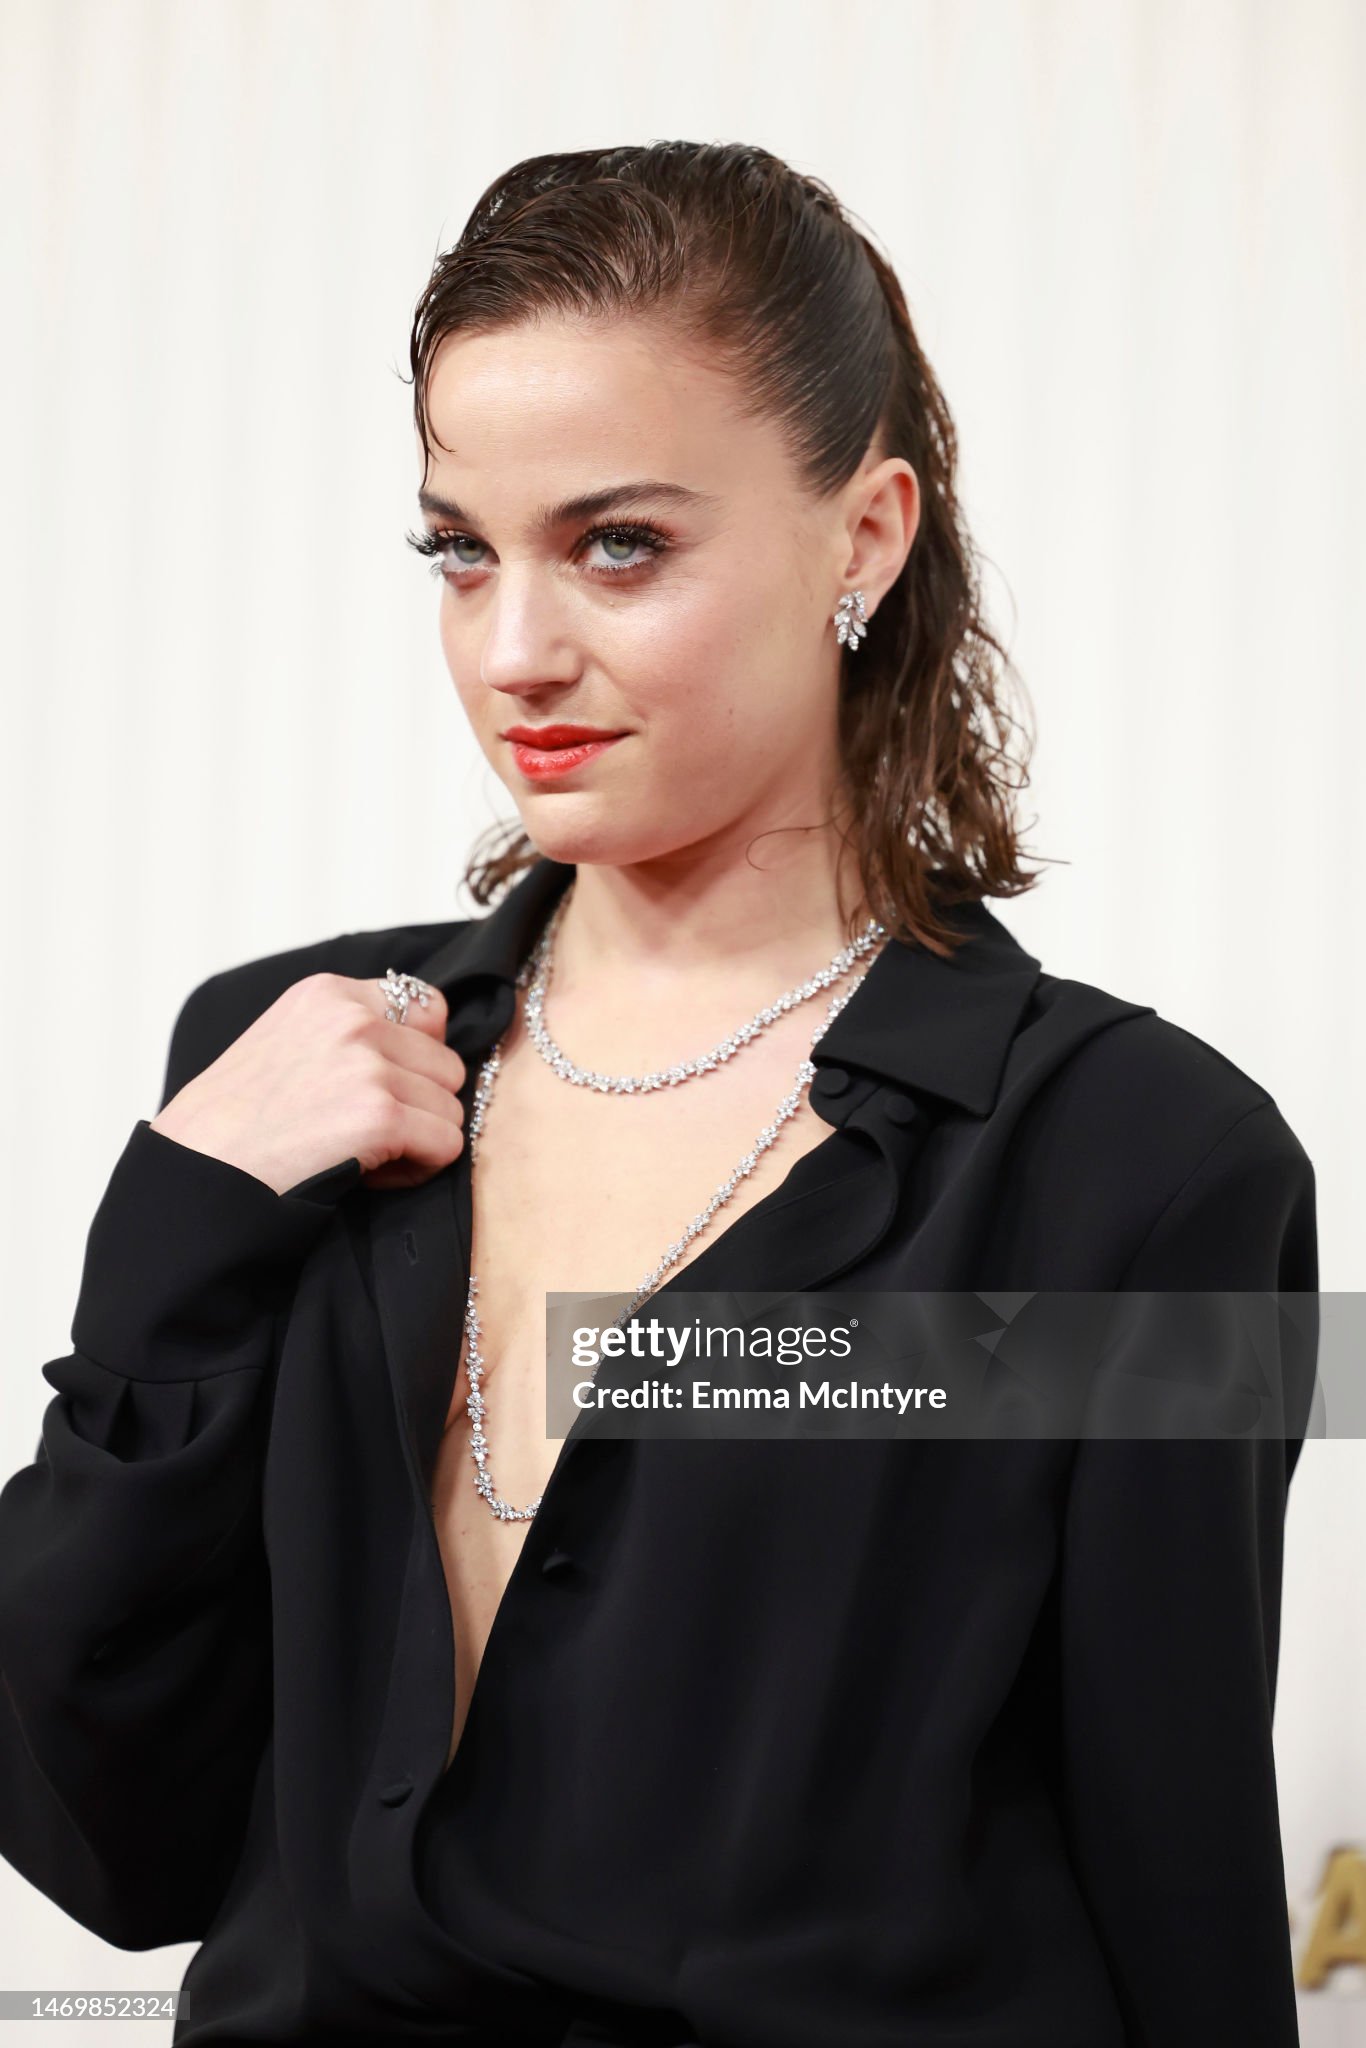 beatrice-grann%C3%B2-attends-the-29th-annual-screen-actors-guild-awards-at-fairmont-century-plaza.jpg